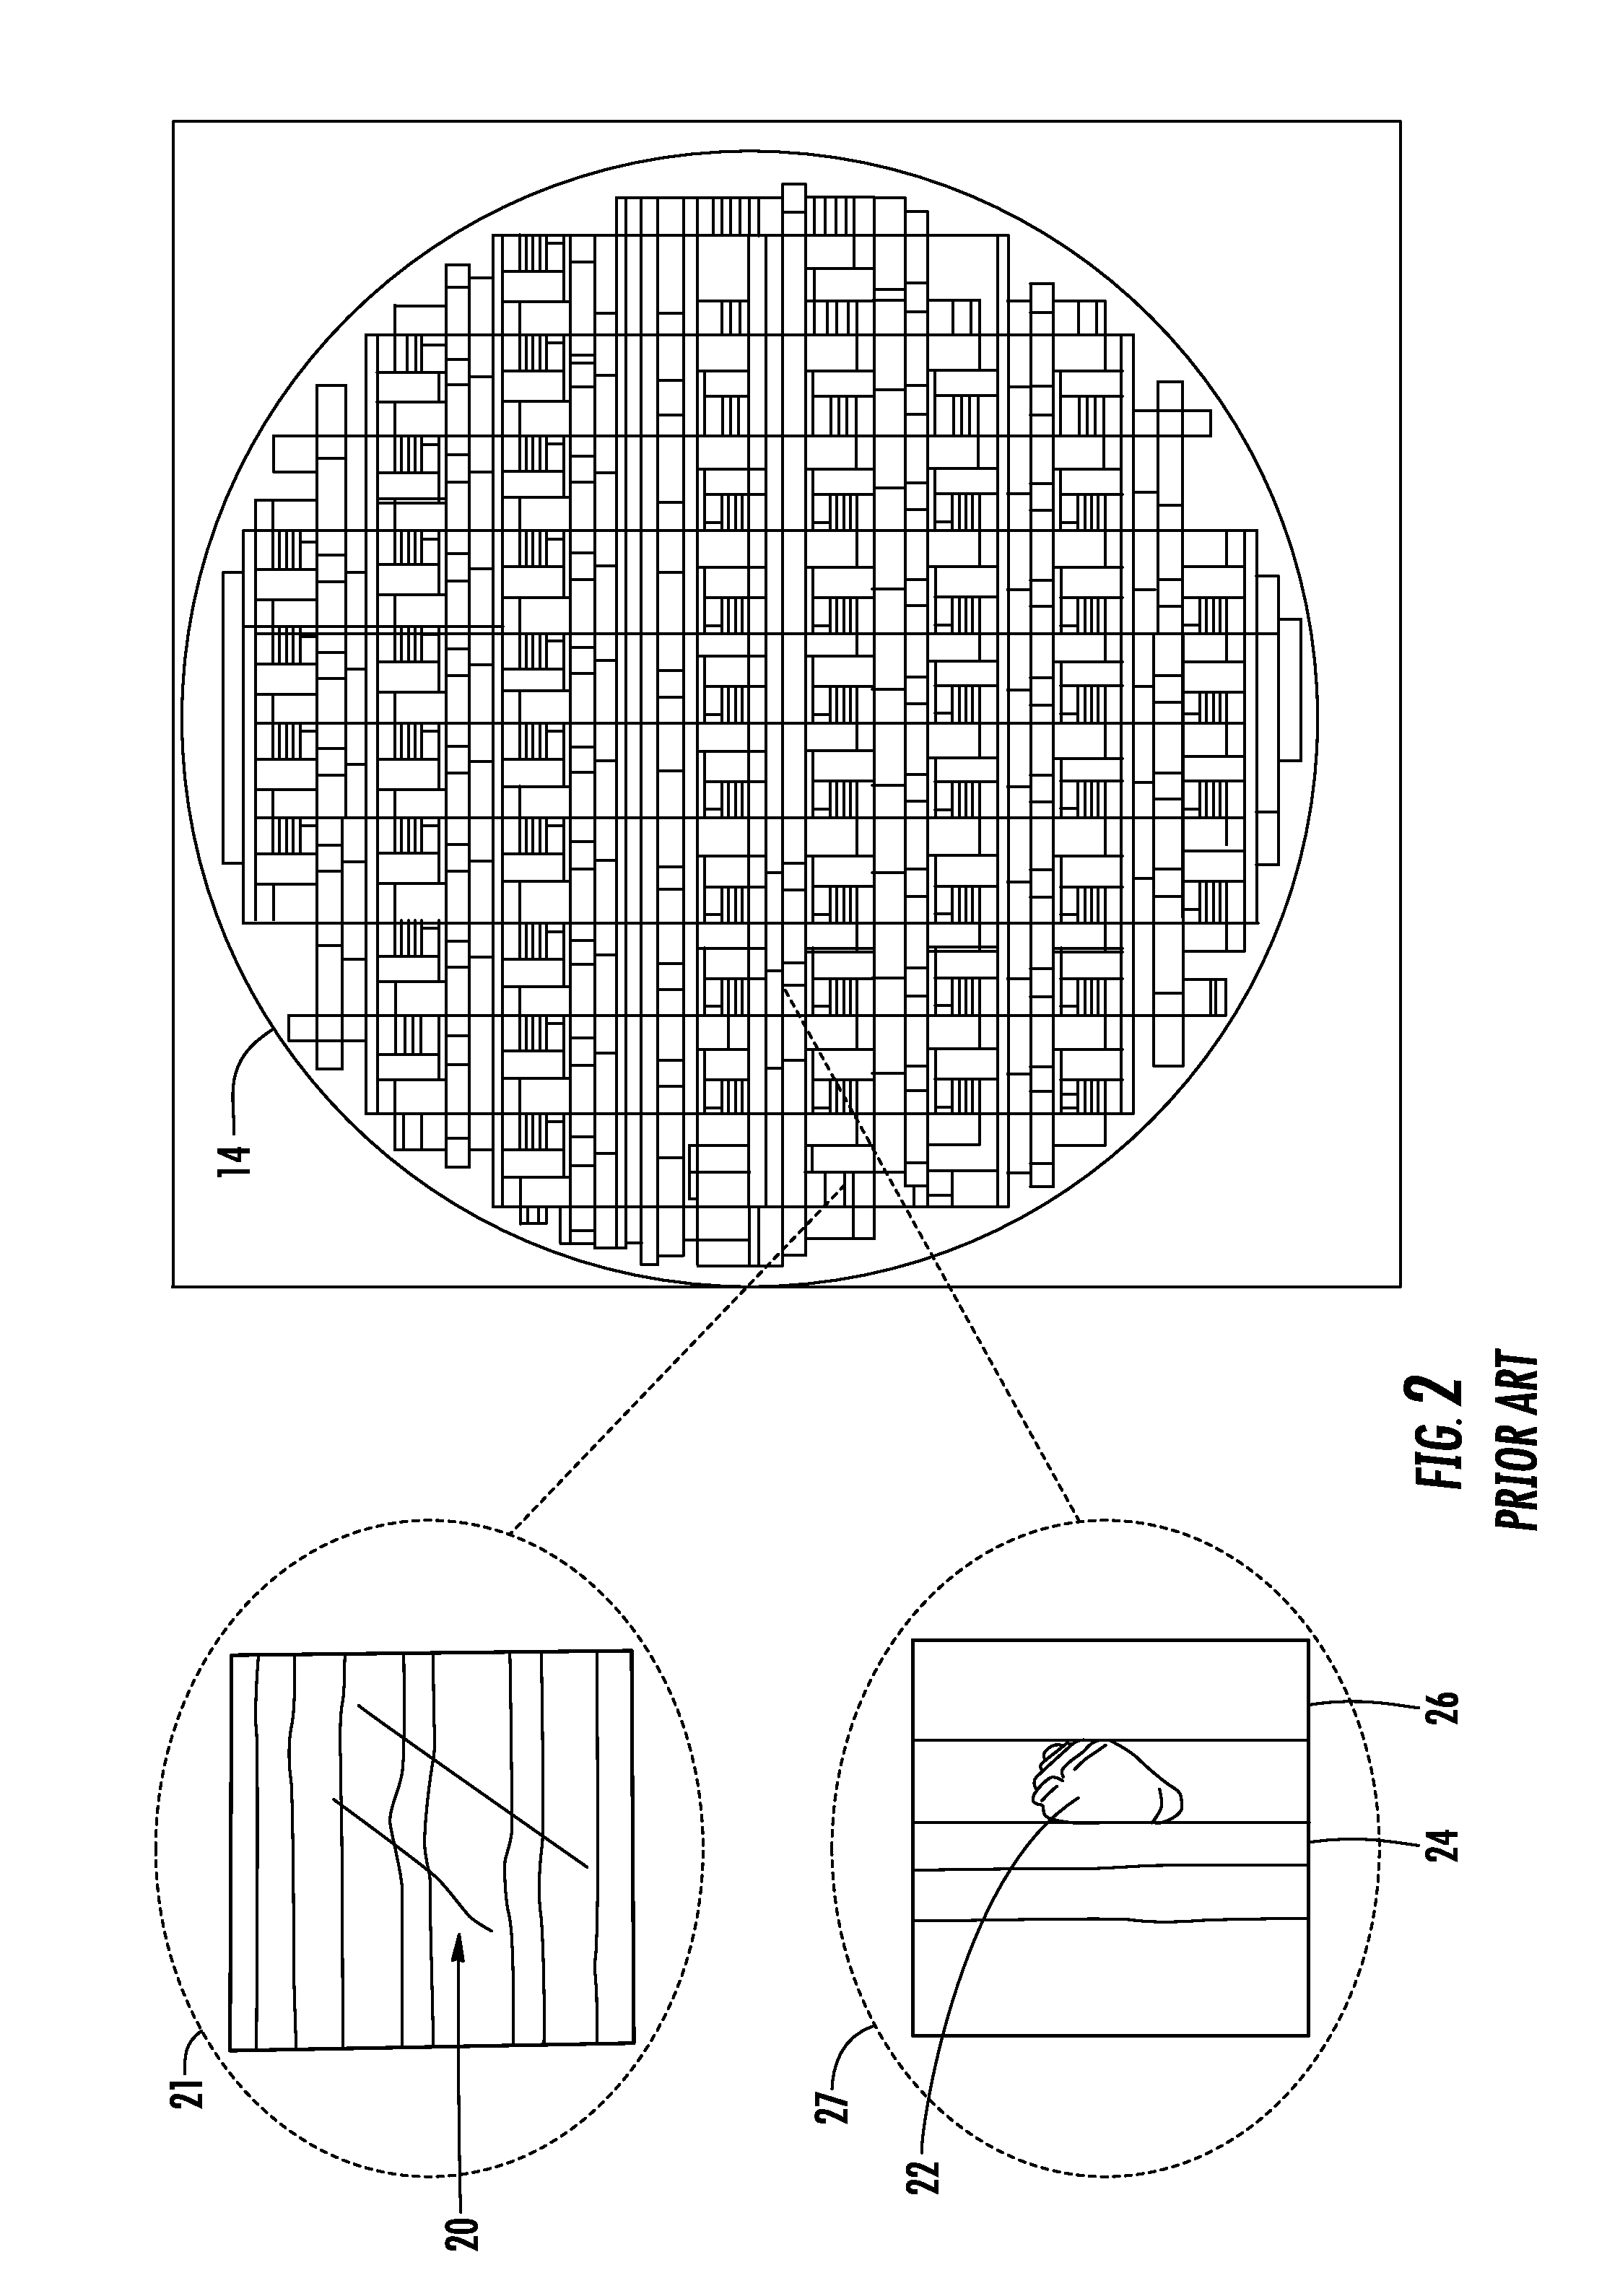 Drying apparatus with exhaust control cap for semiconductor wafers and associated methods